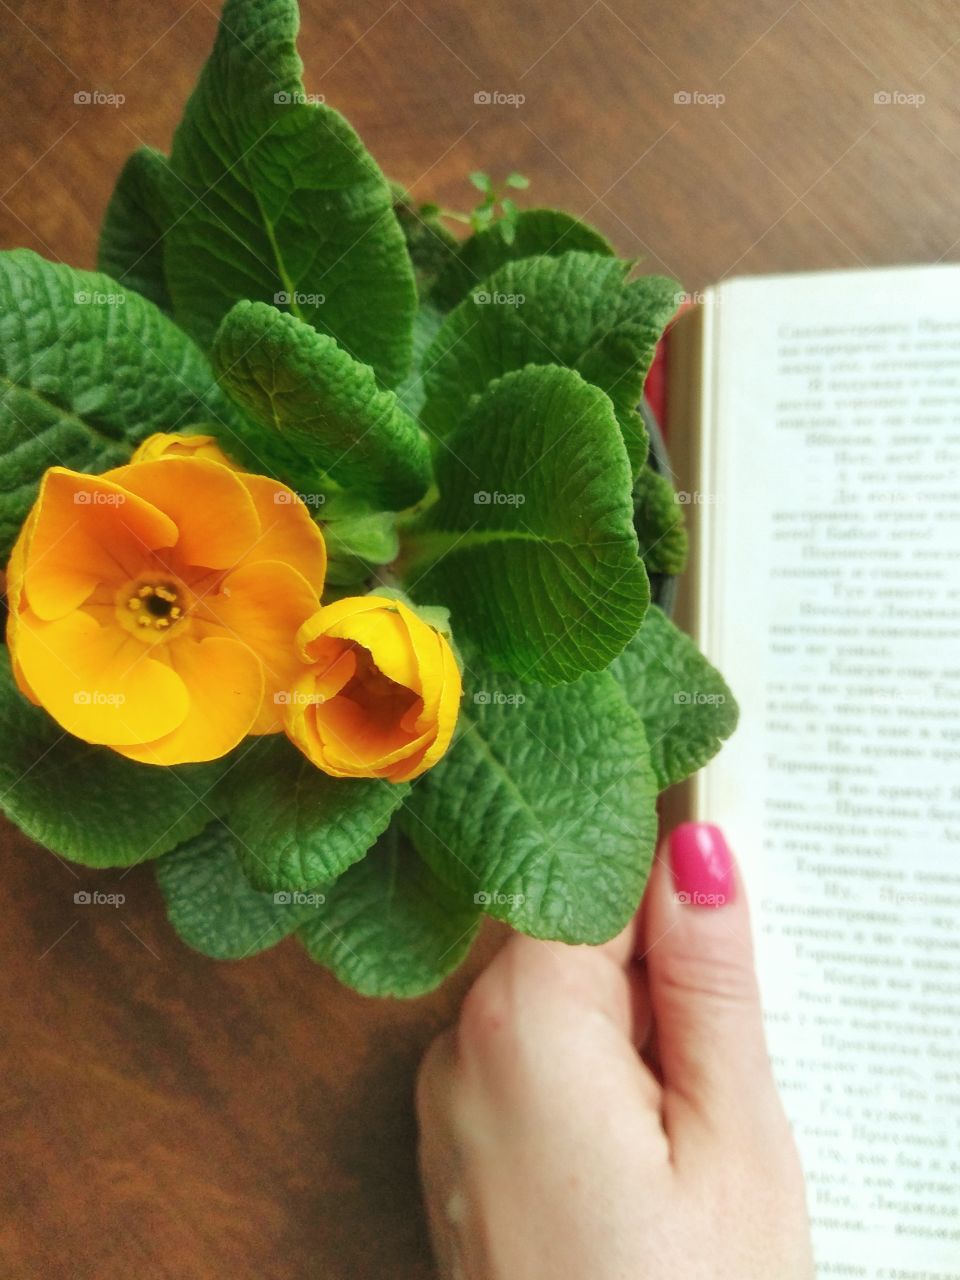 yellow flower and female hand near the open book